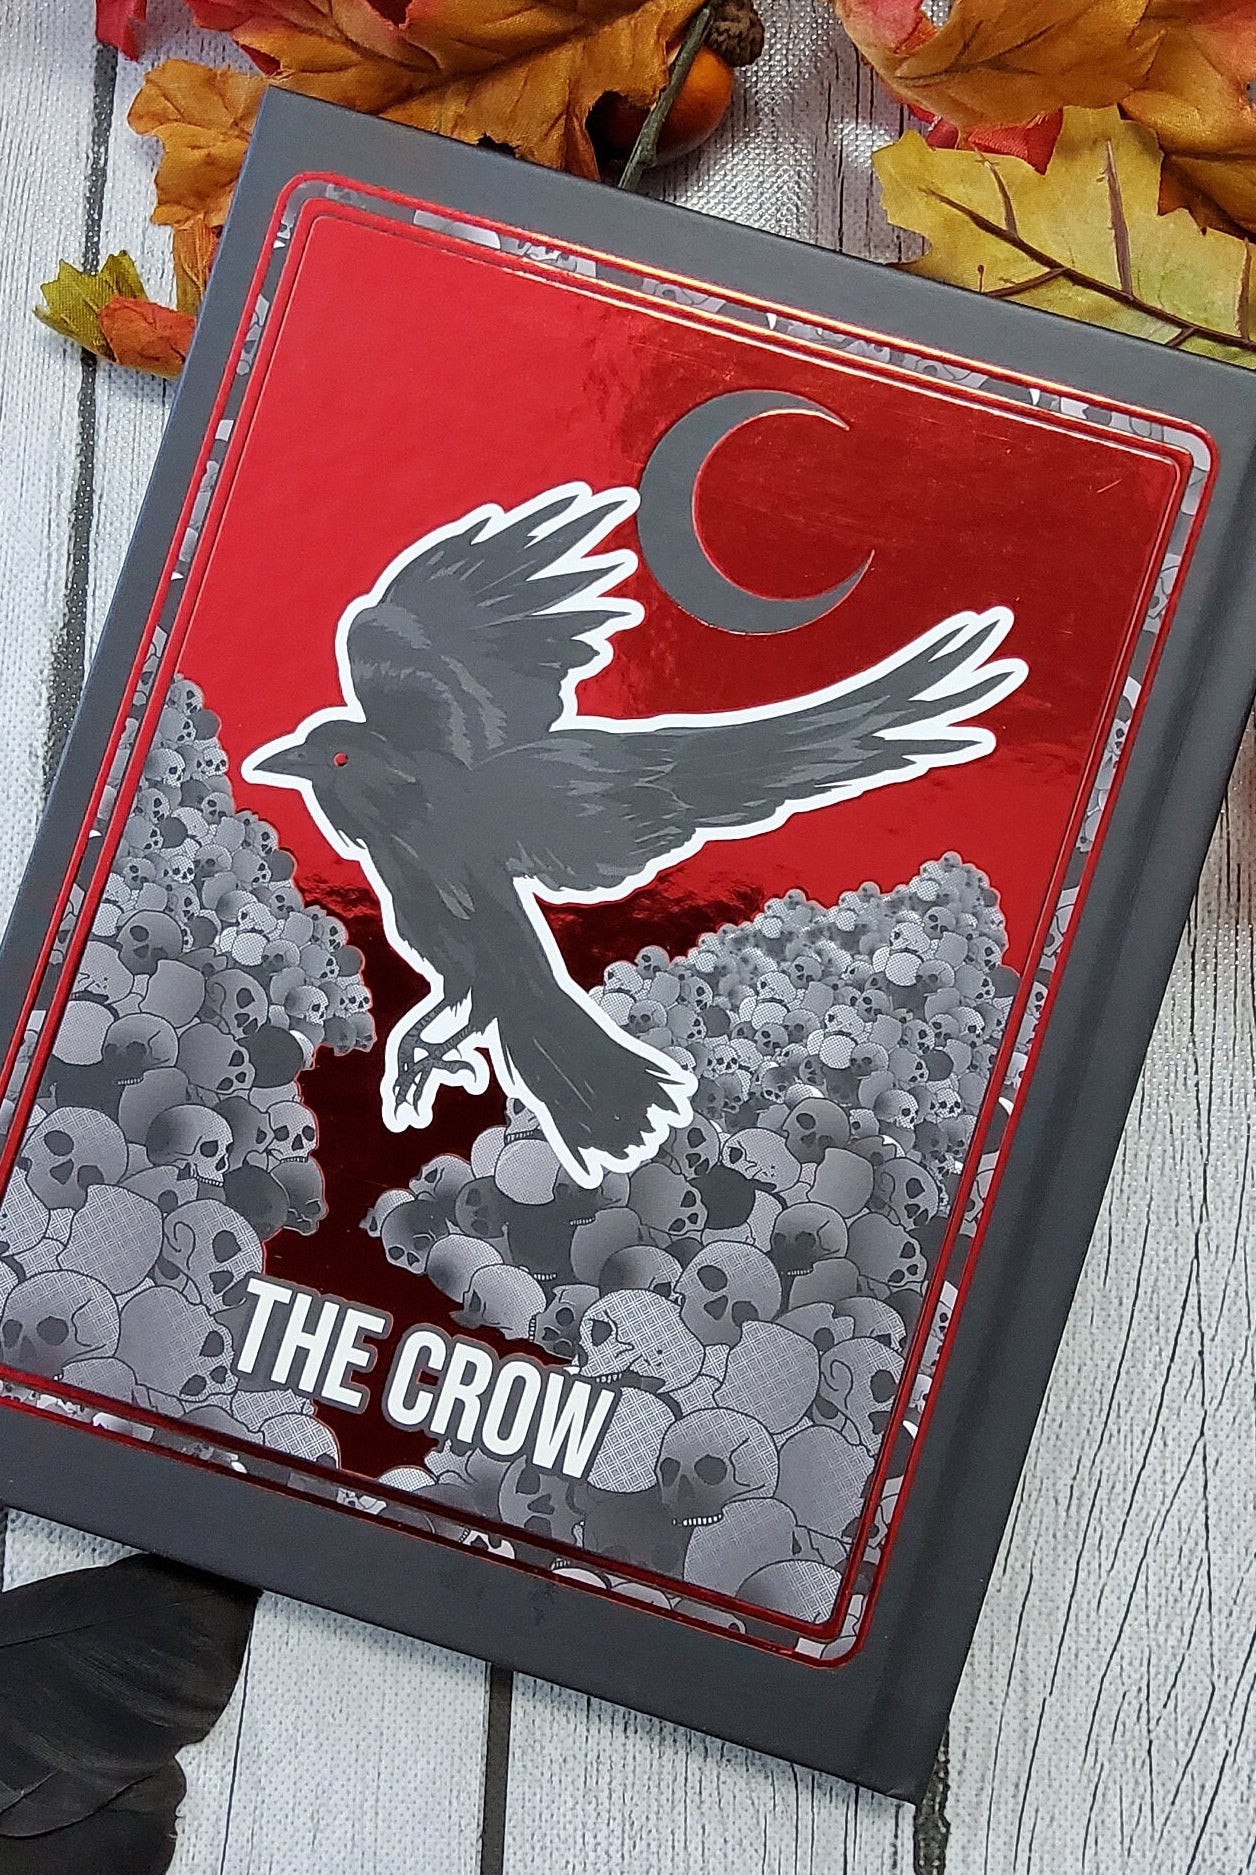 HARDCOVER NOTEBOOK: Crow and Skulls with Black Moon with Red Foil , Red Sky and Crow Notebook Red Foil, Crow and Skulls , Omen Book